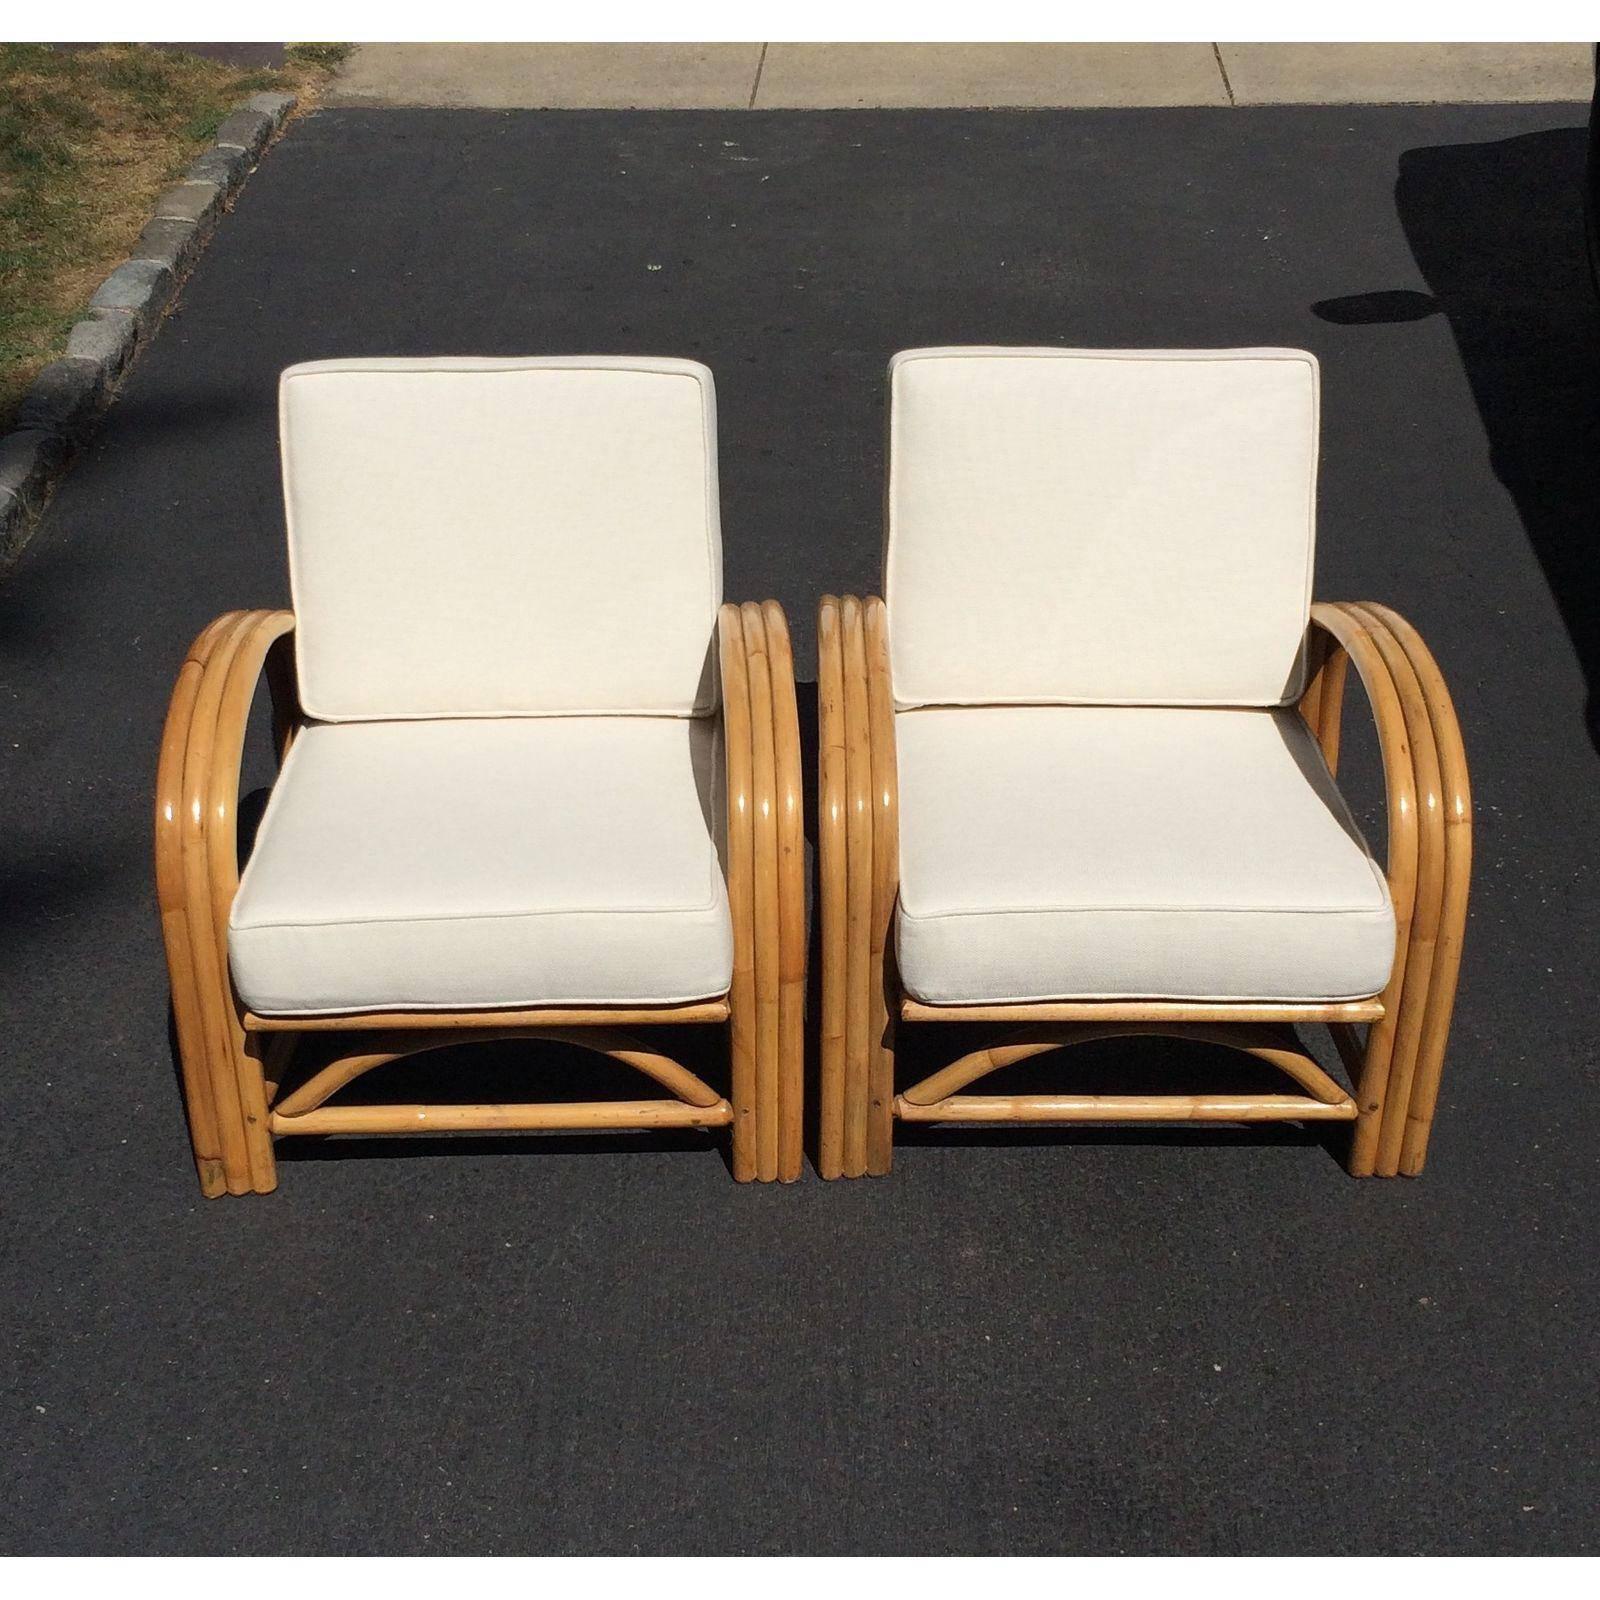 A pair of Mid-Century bamboo club chairs with newly upholstered cushions ready for your home!
Seat height is 16 1/2 